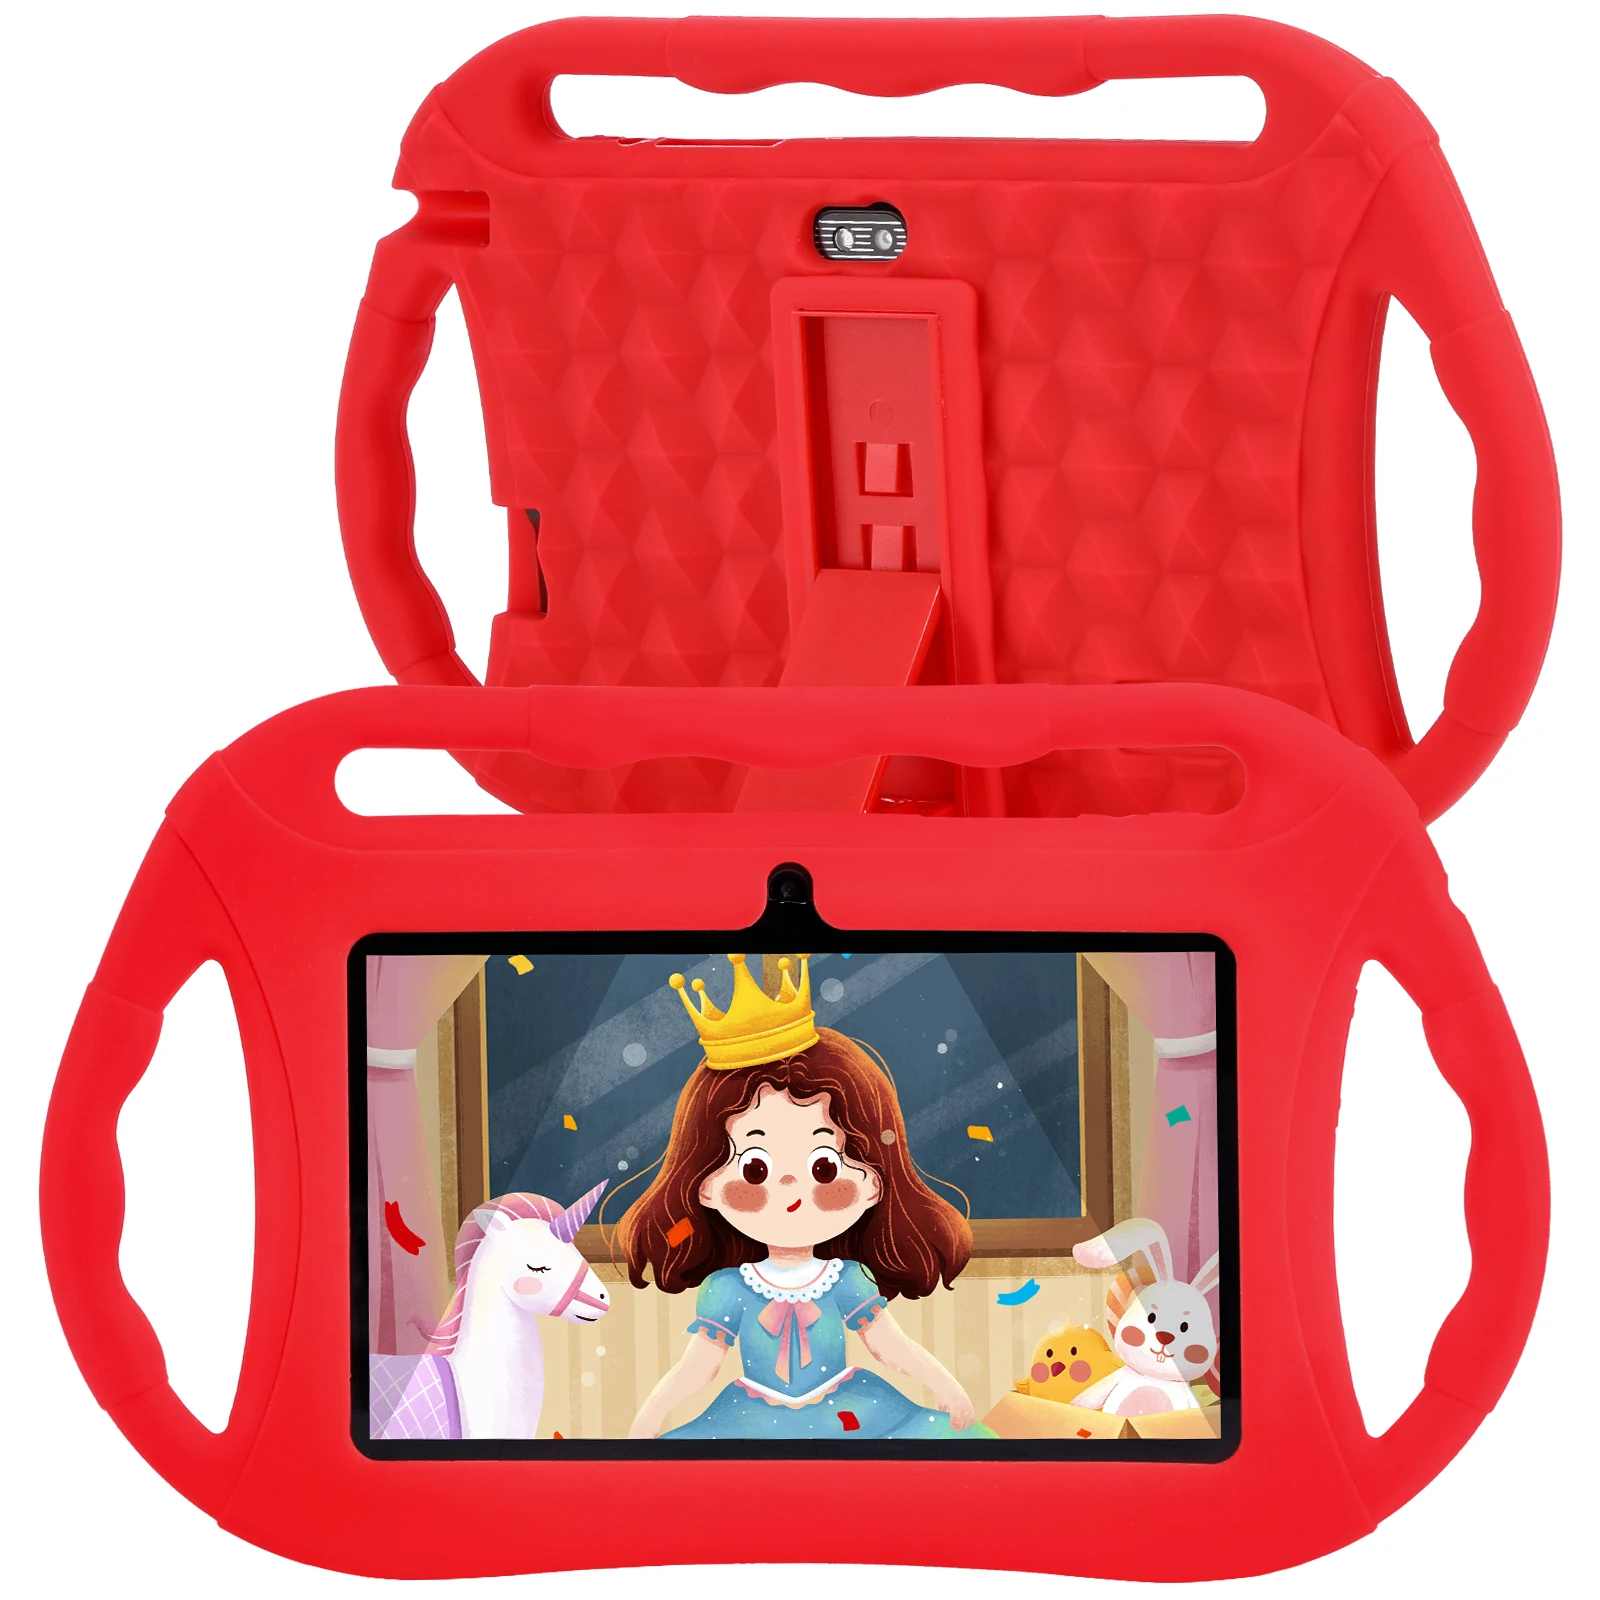 

Veidoo New Arrival 7 inch Kids Tablet Quad Core Android Parental Control Tablet with Dual Camera Educational Tablet PC